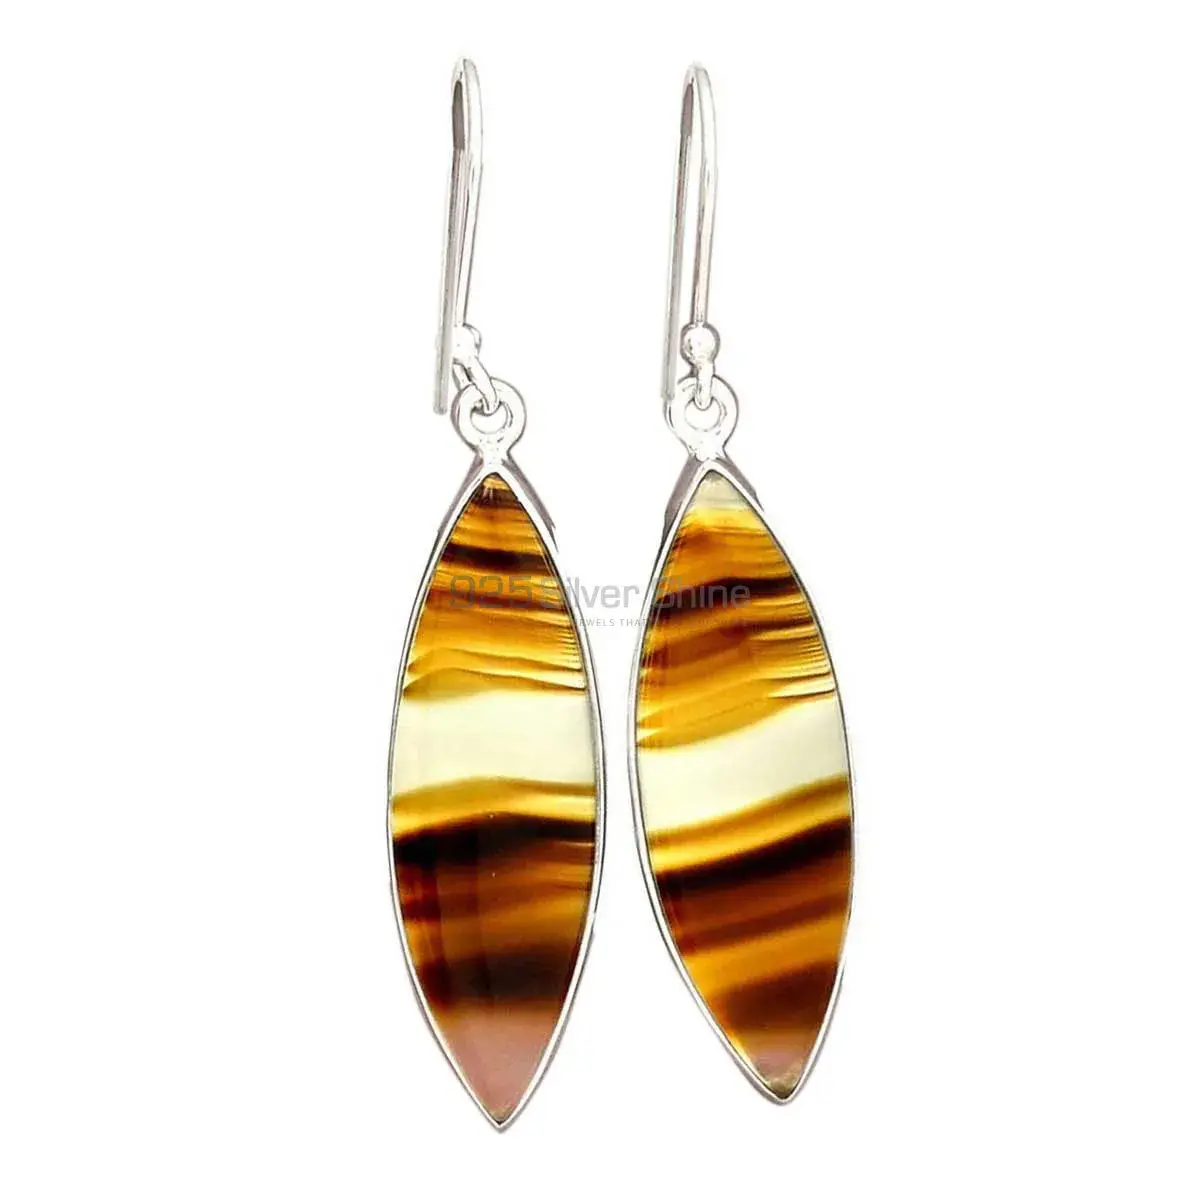 Inexpensive 925 Sterling Silver Handmade Earrings Manufacturer In Montana Agate Gemstone Jewelry 925SE2312_9